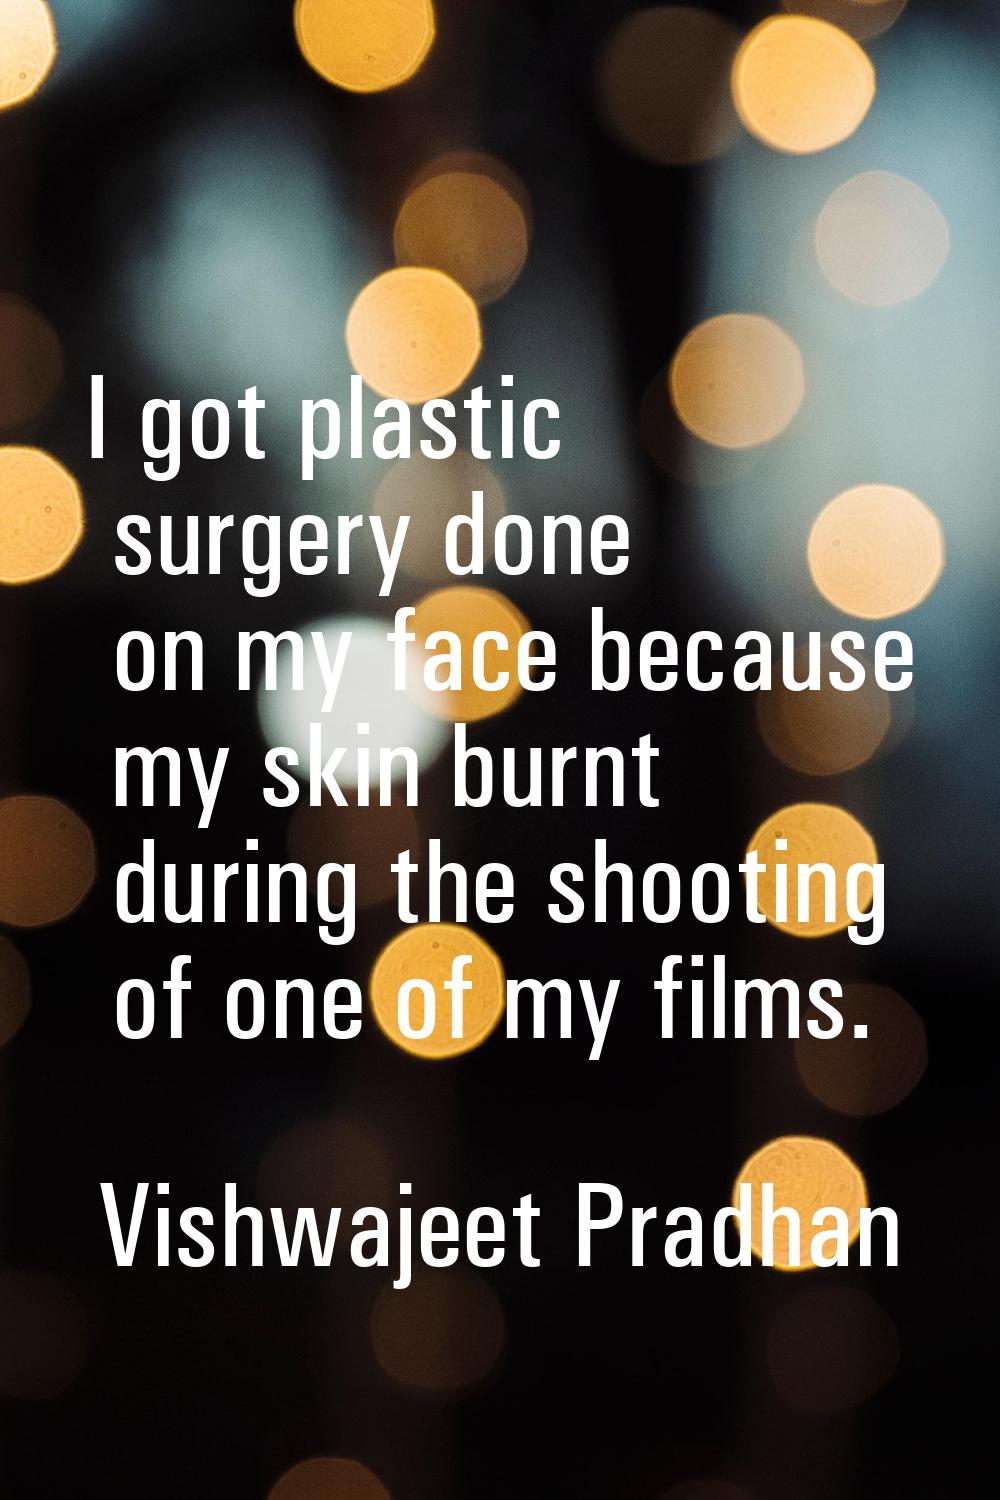 I got plastic surgery done on my face because my skin burnt during the shooting of one of my films.